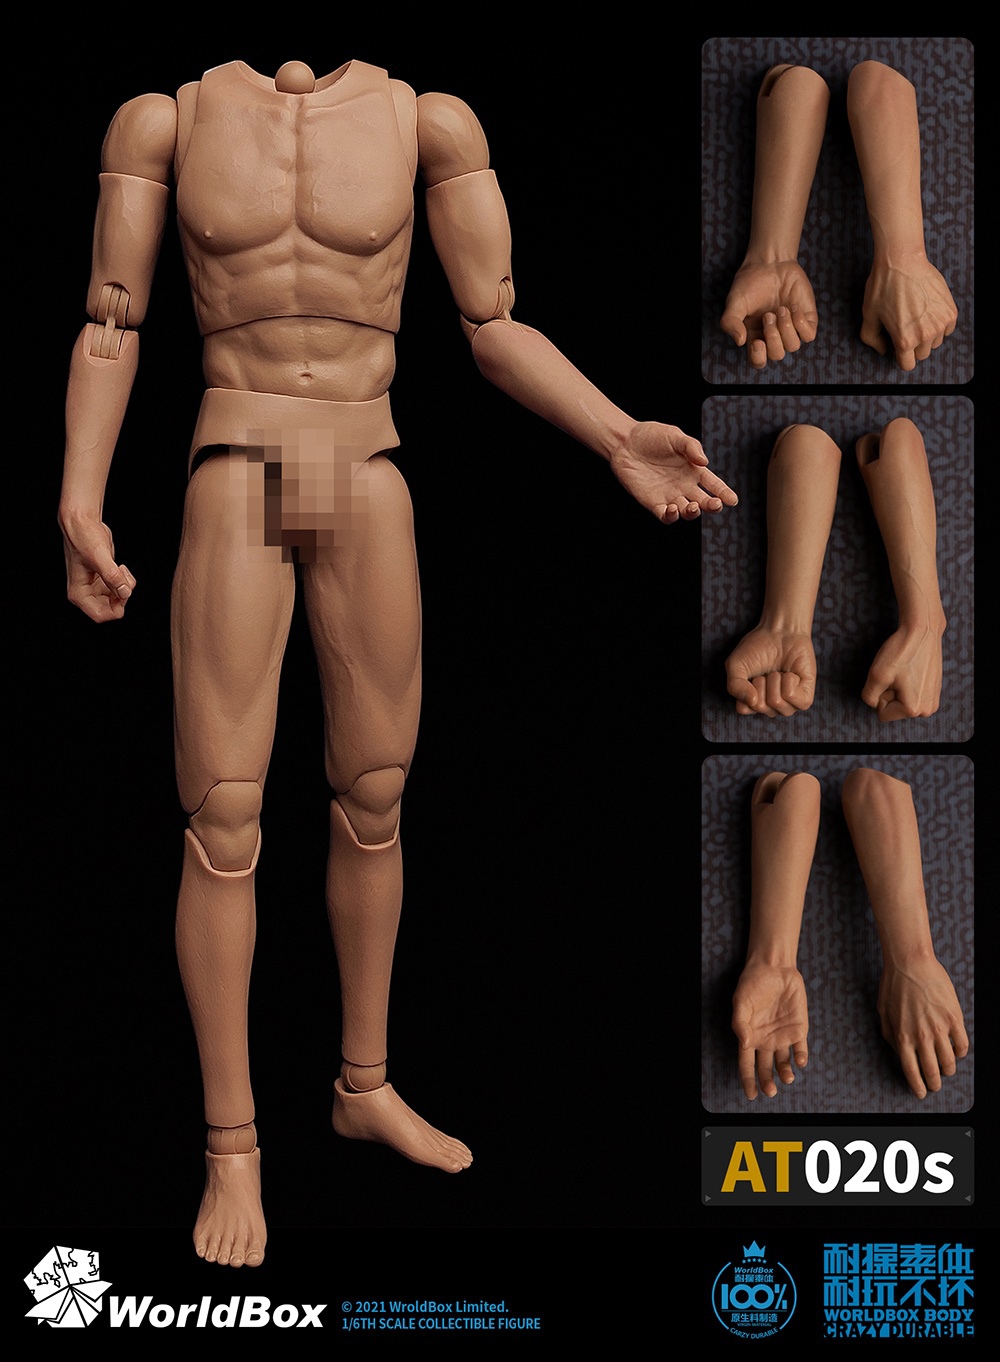 NEW PRODUCT: Worldbox: 1/6 AT020S 1/6 Scale Body with forearms 10460512